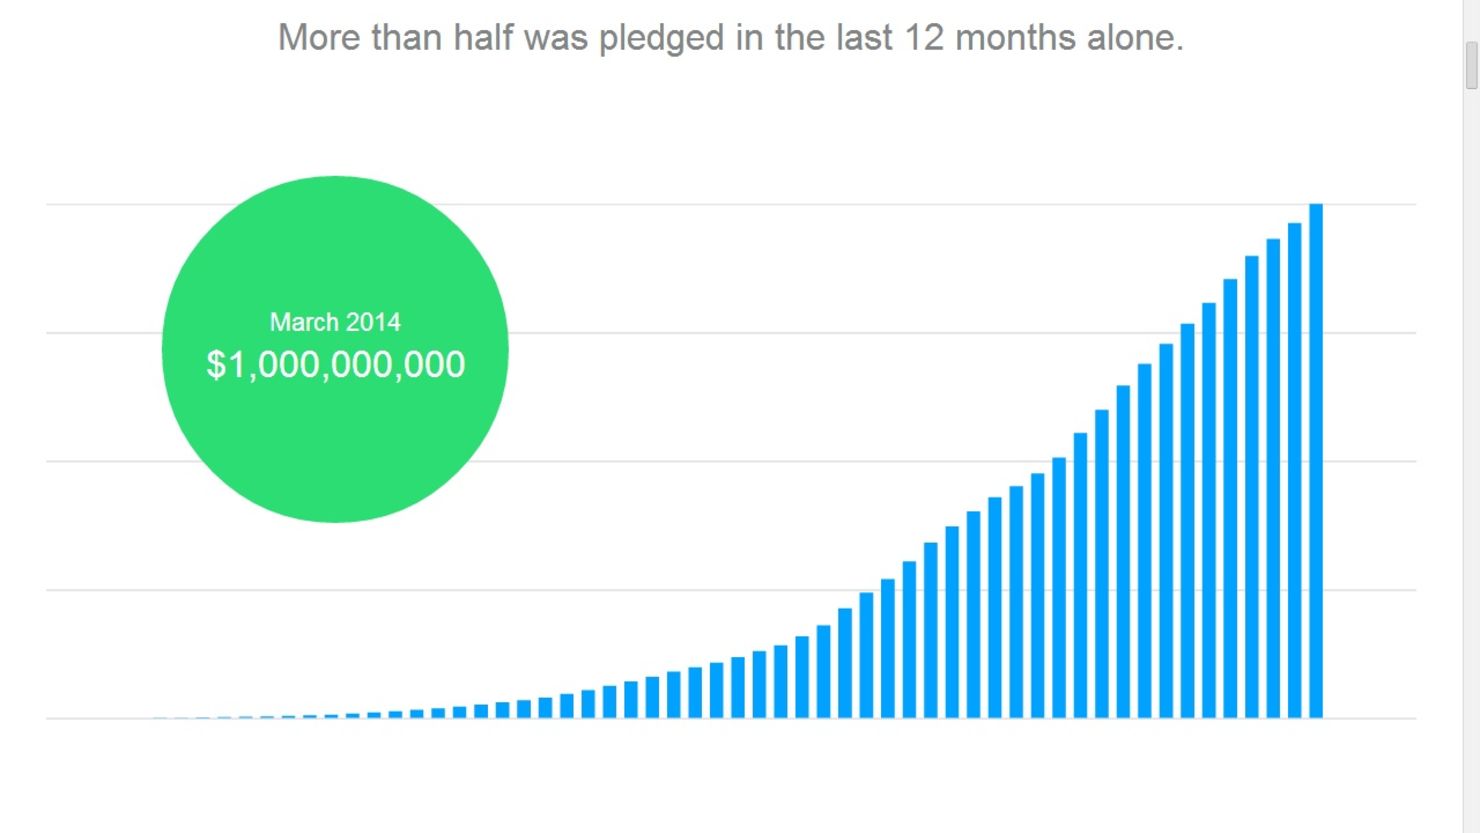 Funding on Kickstarter is skyrocketing. More than half its $1B was pledged in the last 12 months alone.